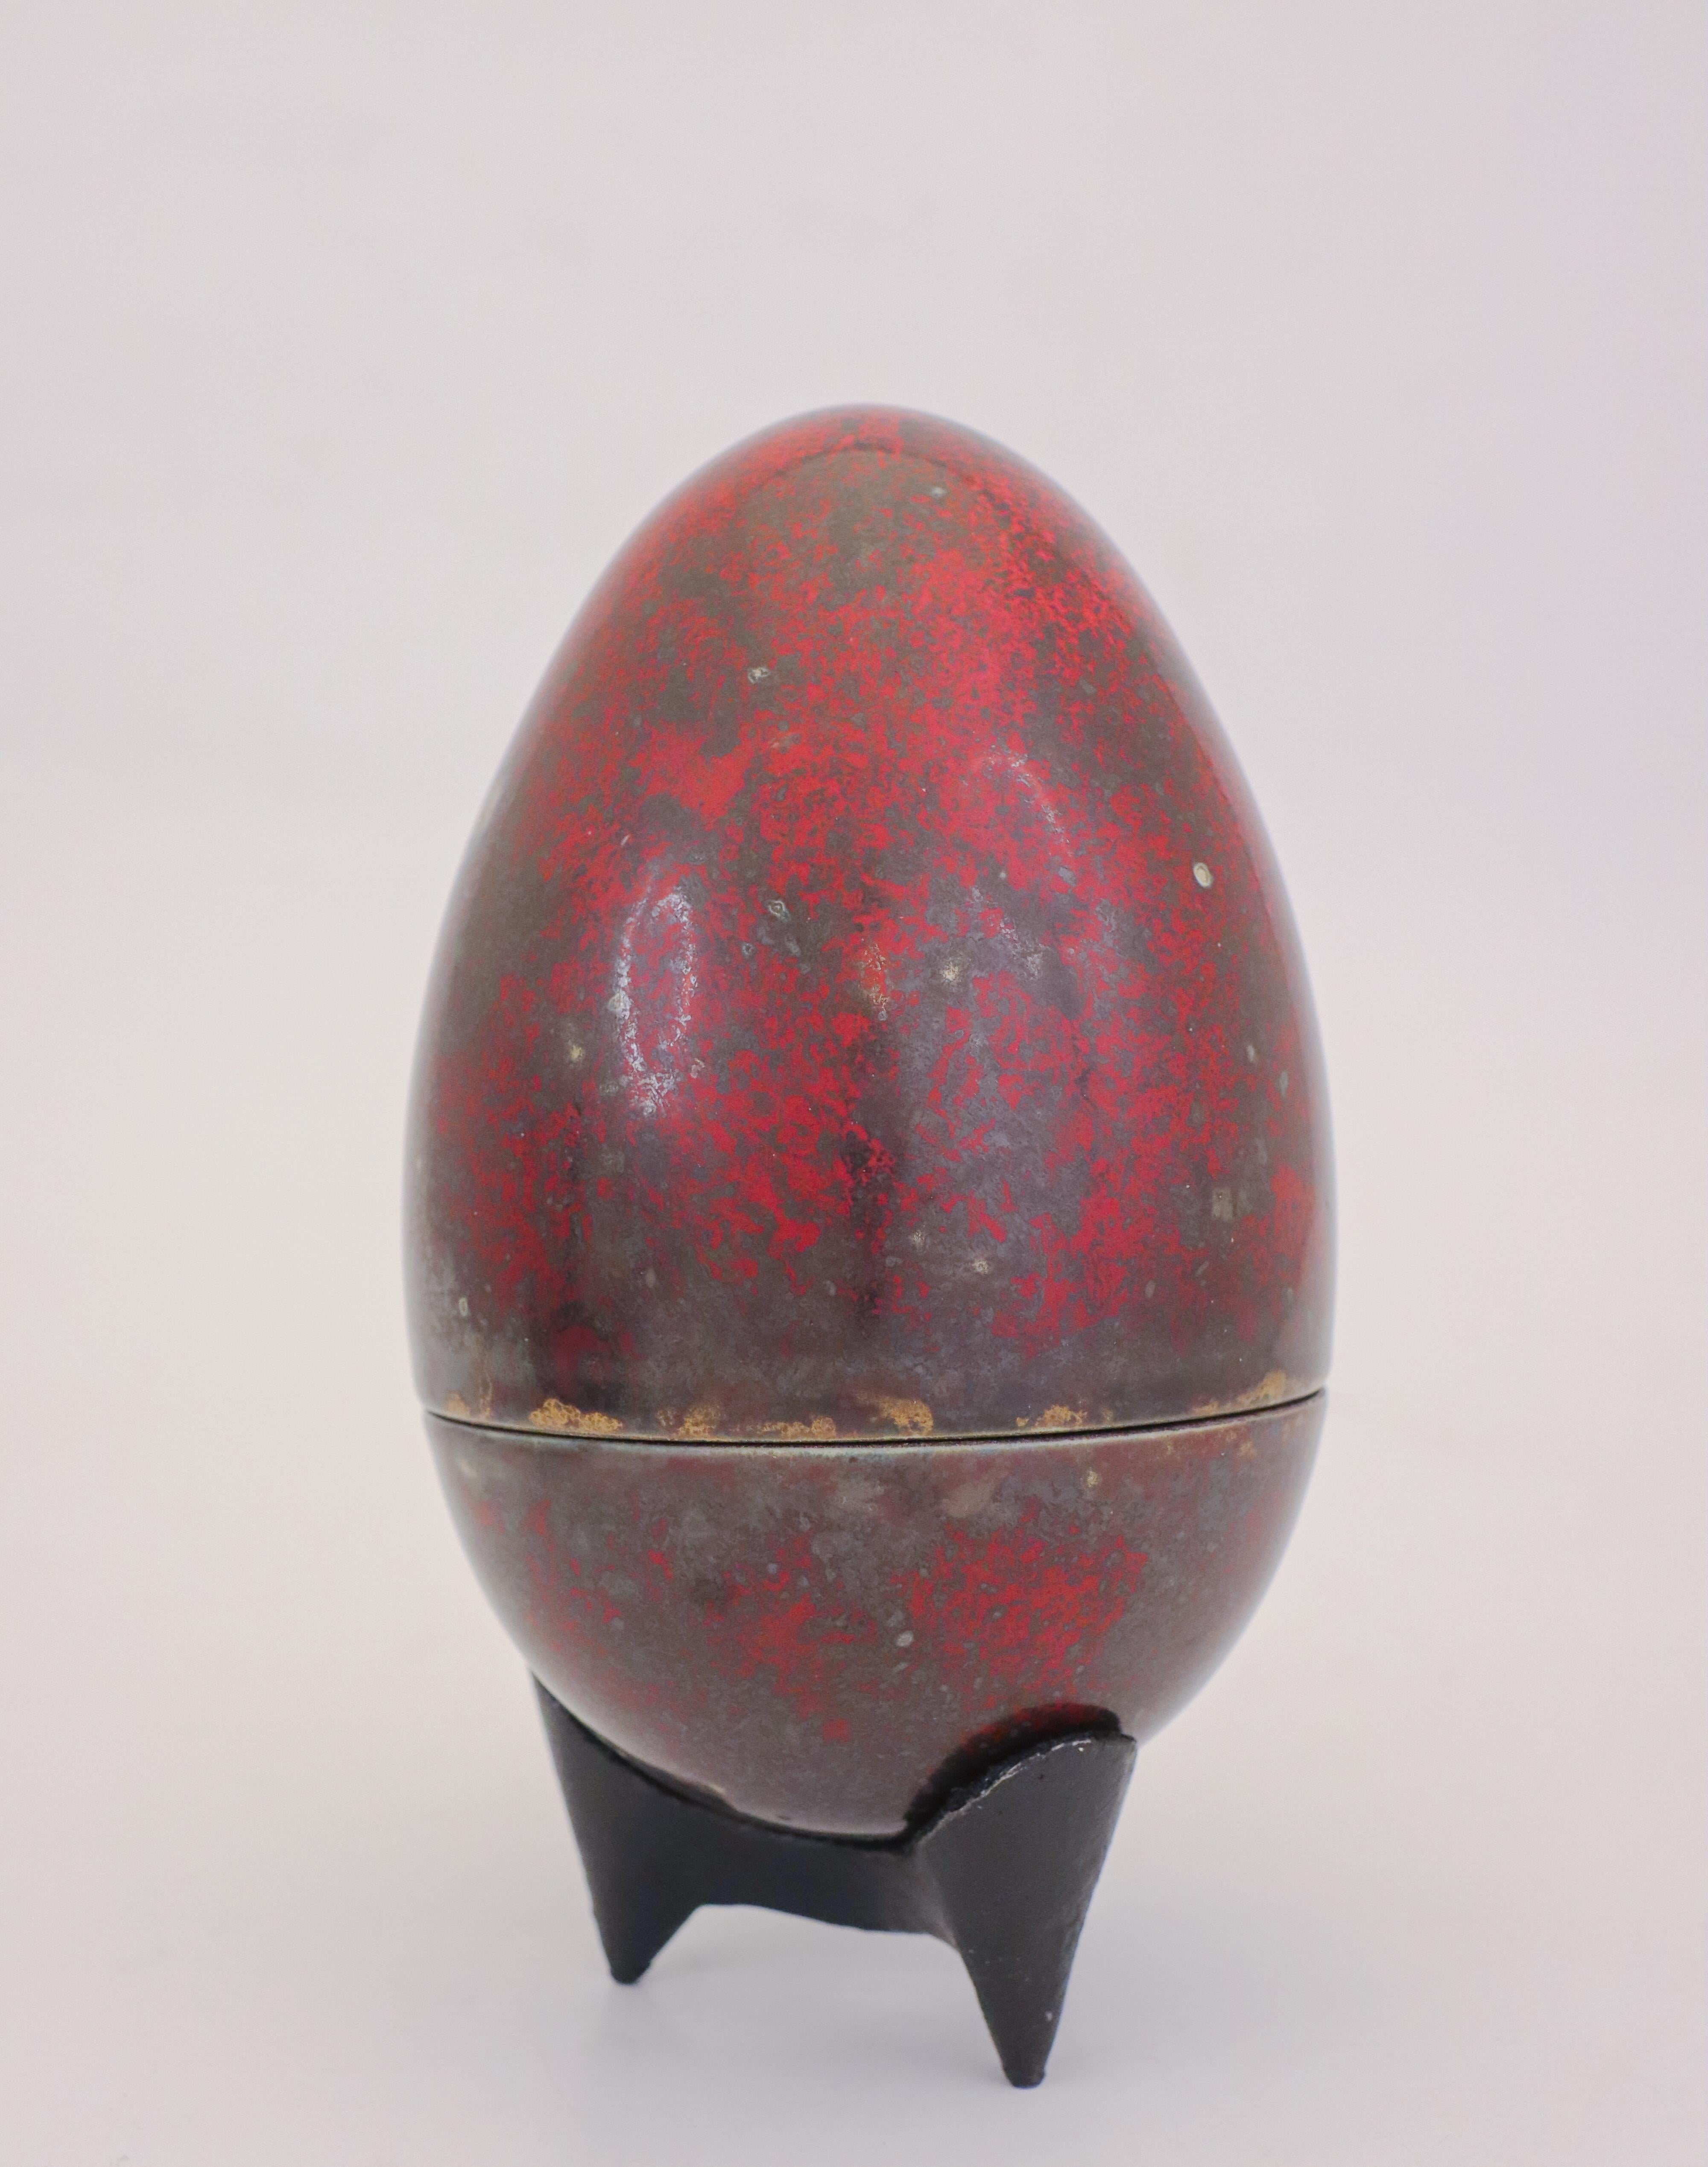 A red Egg designed by the Swedish ceramicist Hans Hedberg, who lived and worked in Biot, France. This egg is 20 cm (8